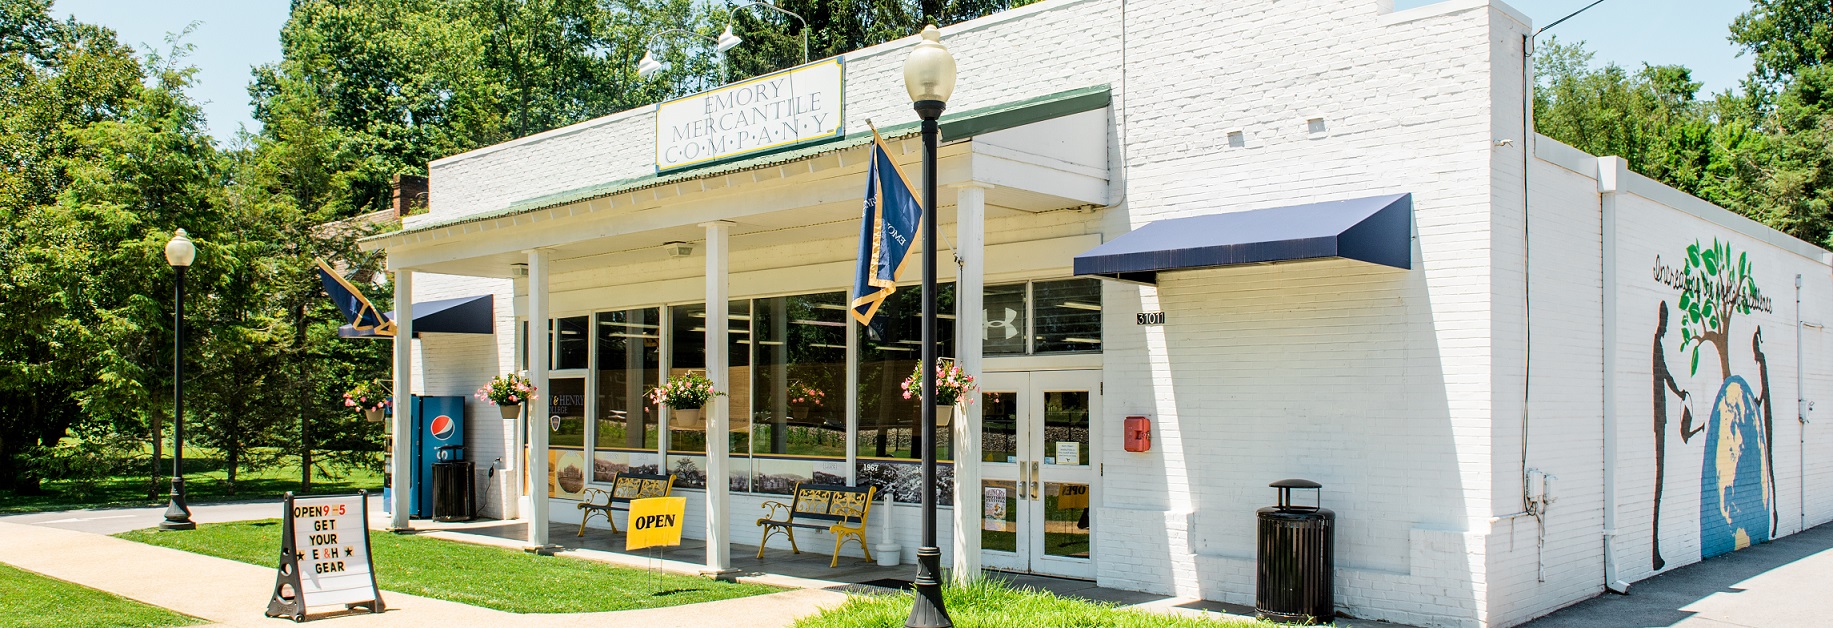 the exterior of the Mercantile at Oxford Ave, a white brick building with two benches and an Emory & Henry flag out front